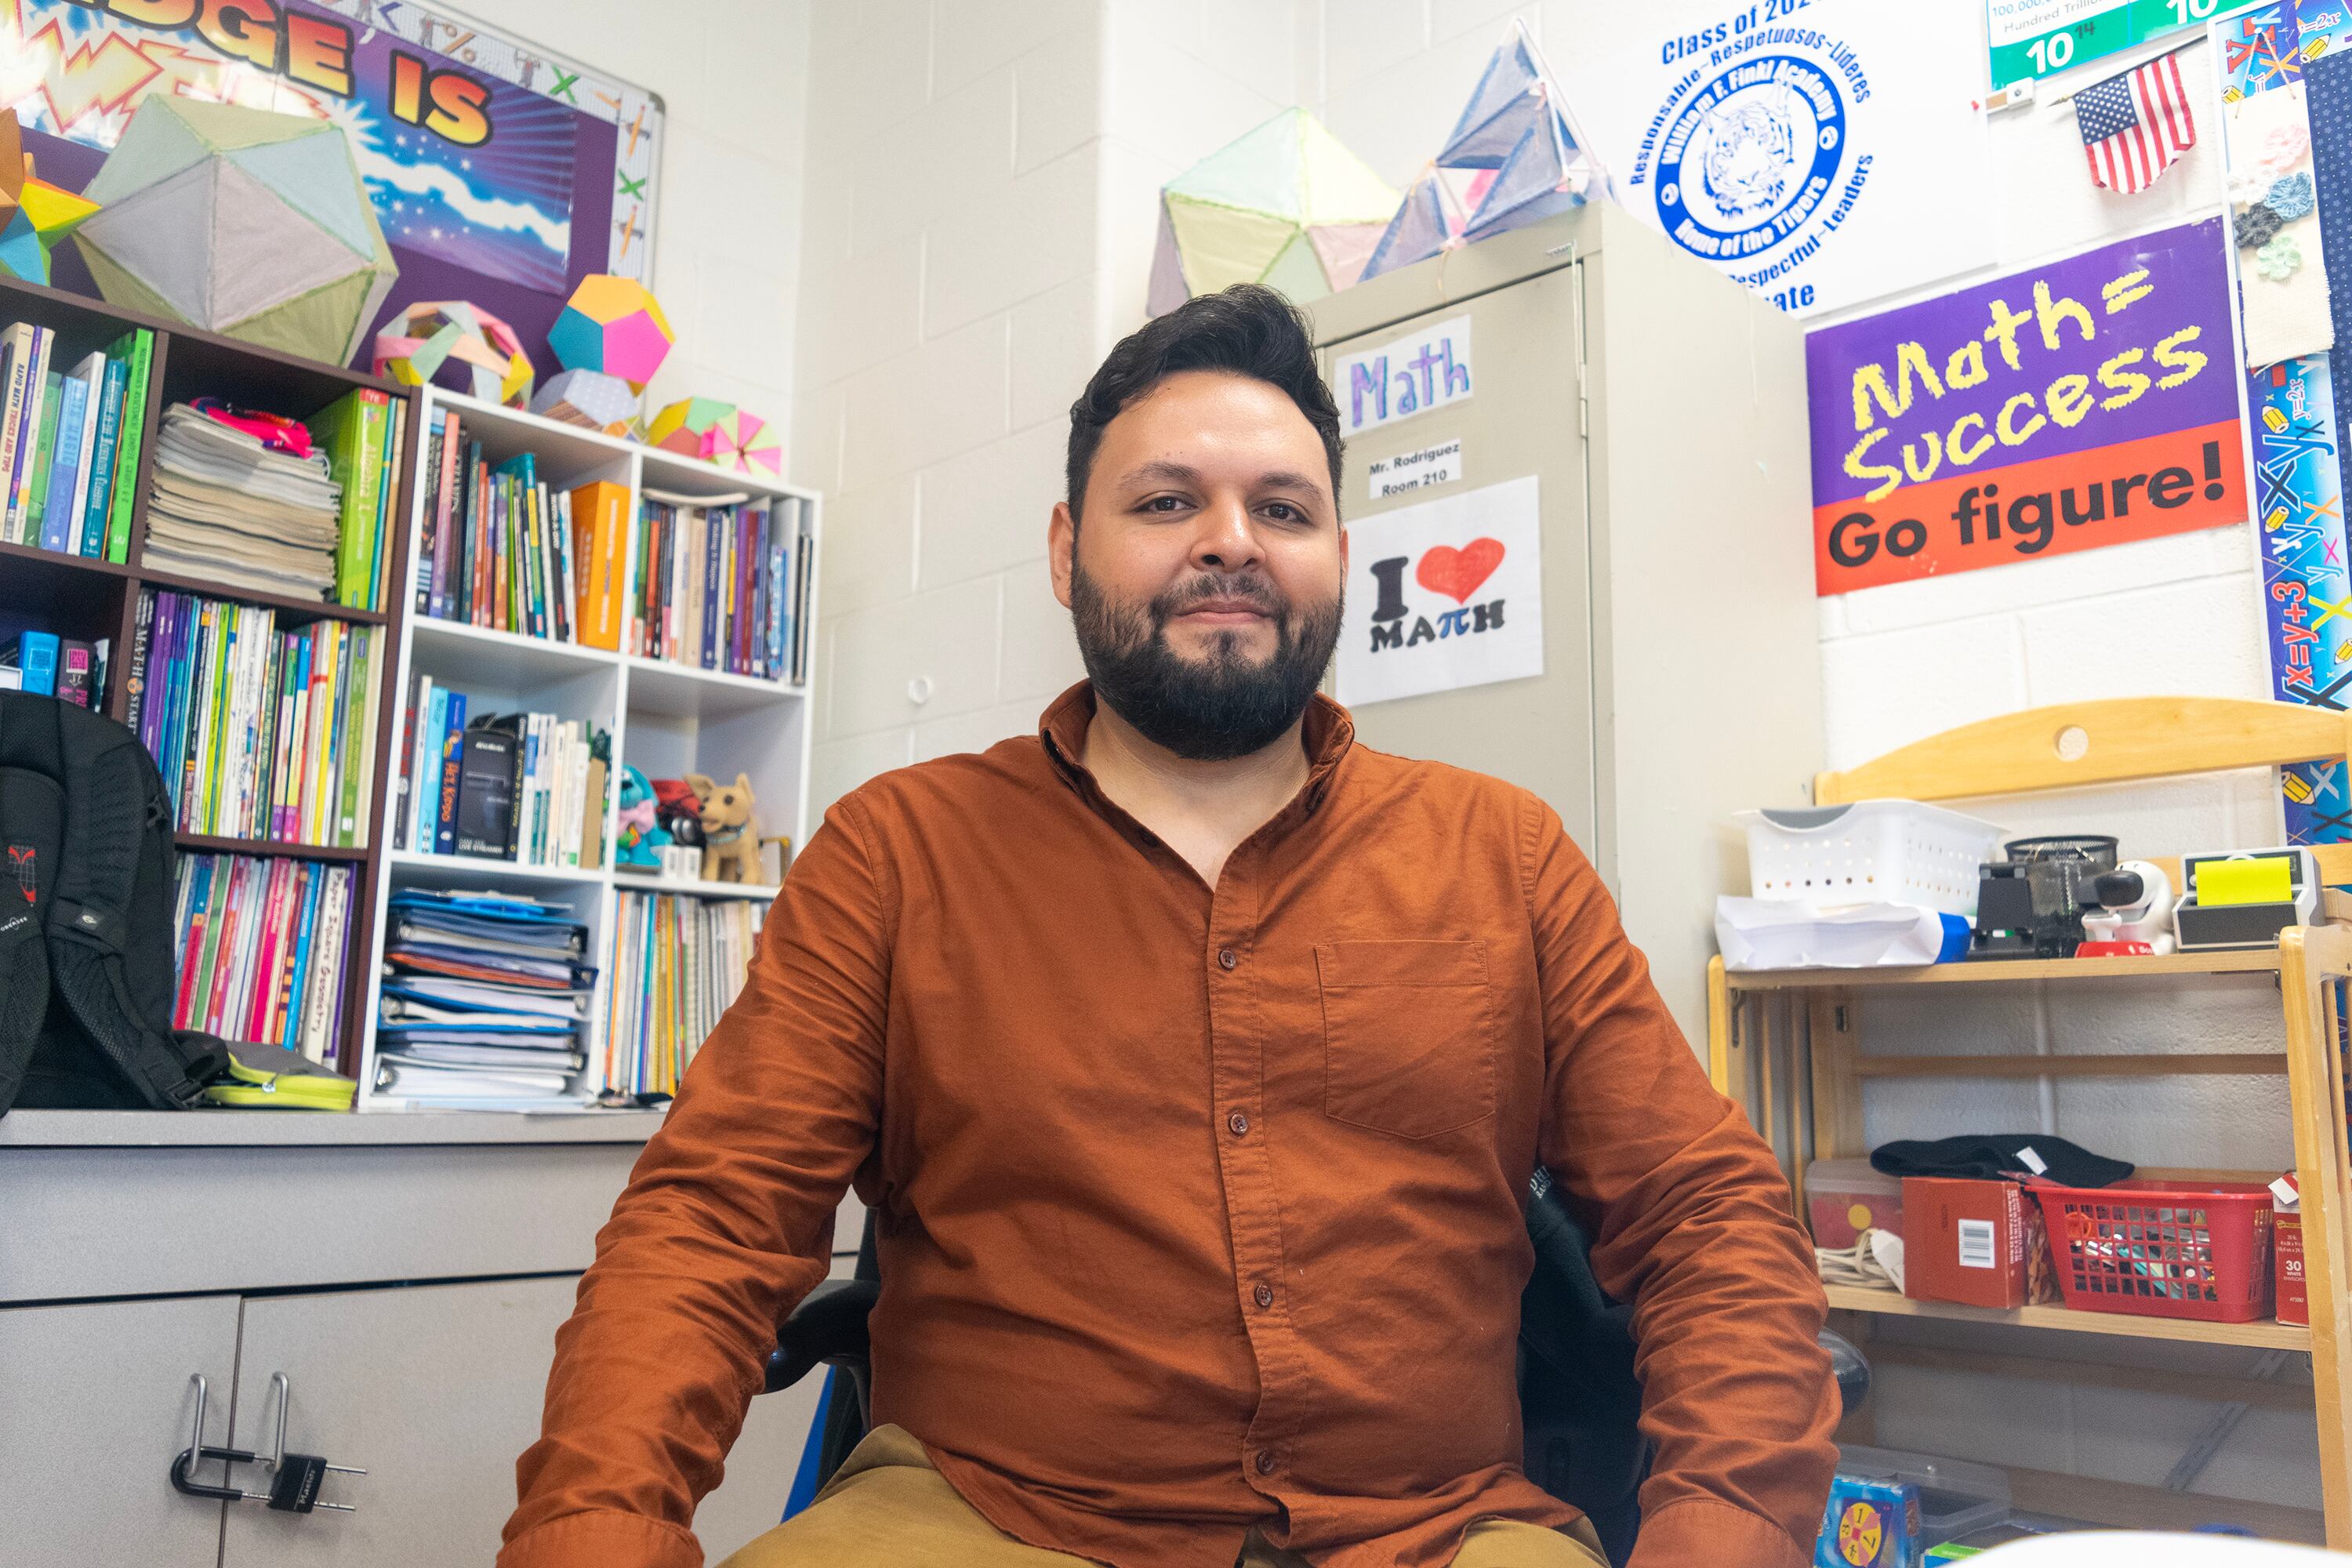 Giovanny Navarro, wearing an orange formal shirt, sits at an office chair. Behind him are signs that say “Math=success” and “I heart math.” There also is a bookshelf and file cabinet behind him with colorful books. Navarro smiles toward the camera